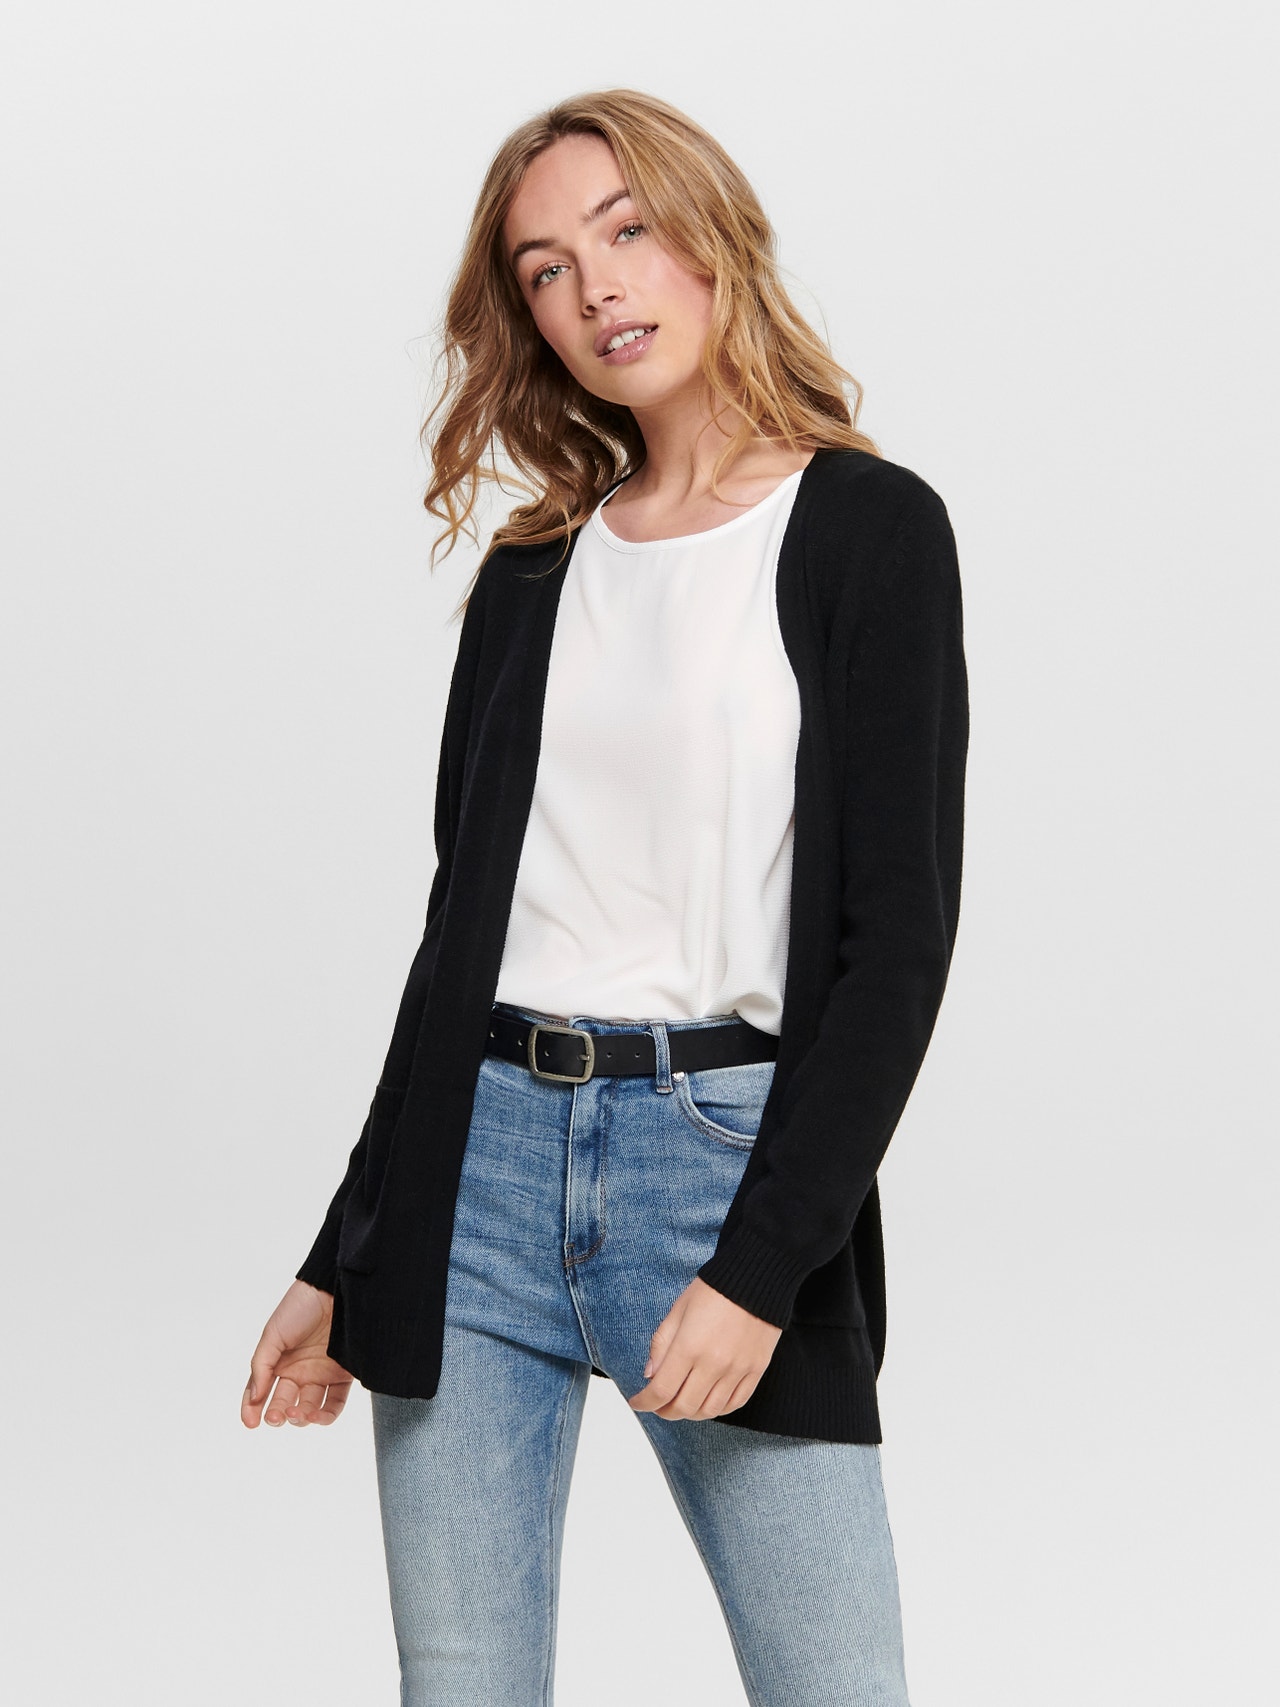 ONLY Knitted cardigan -Black - 15174274